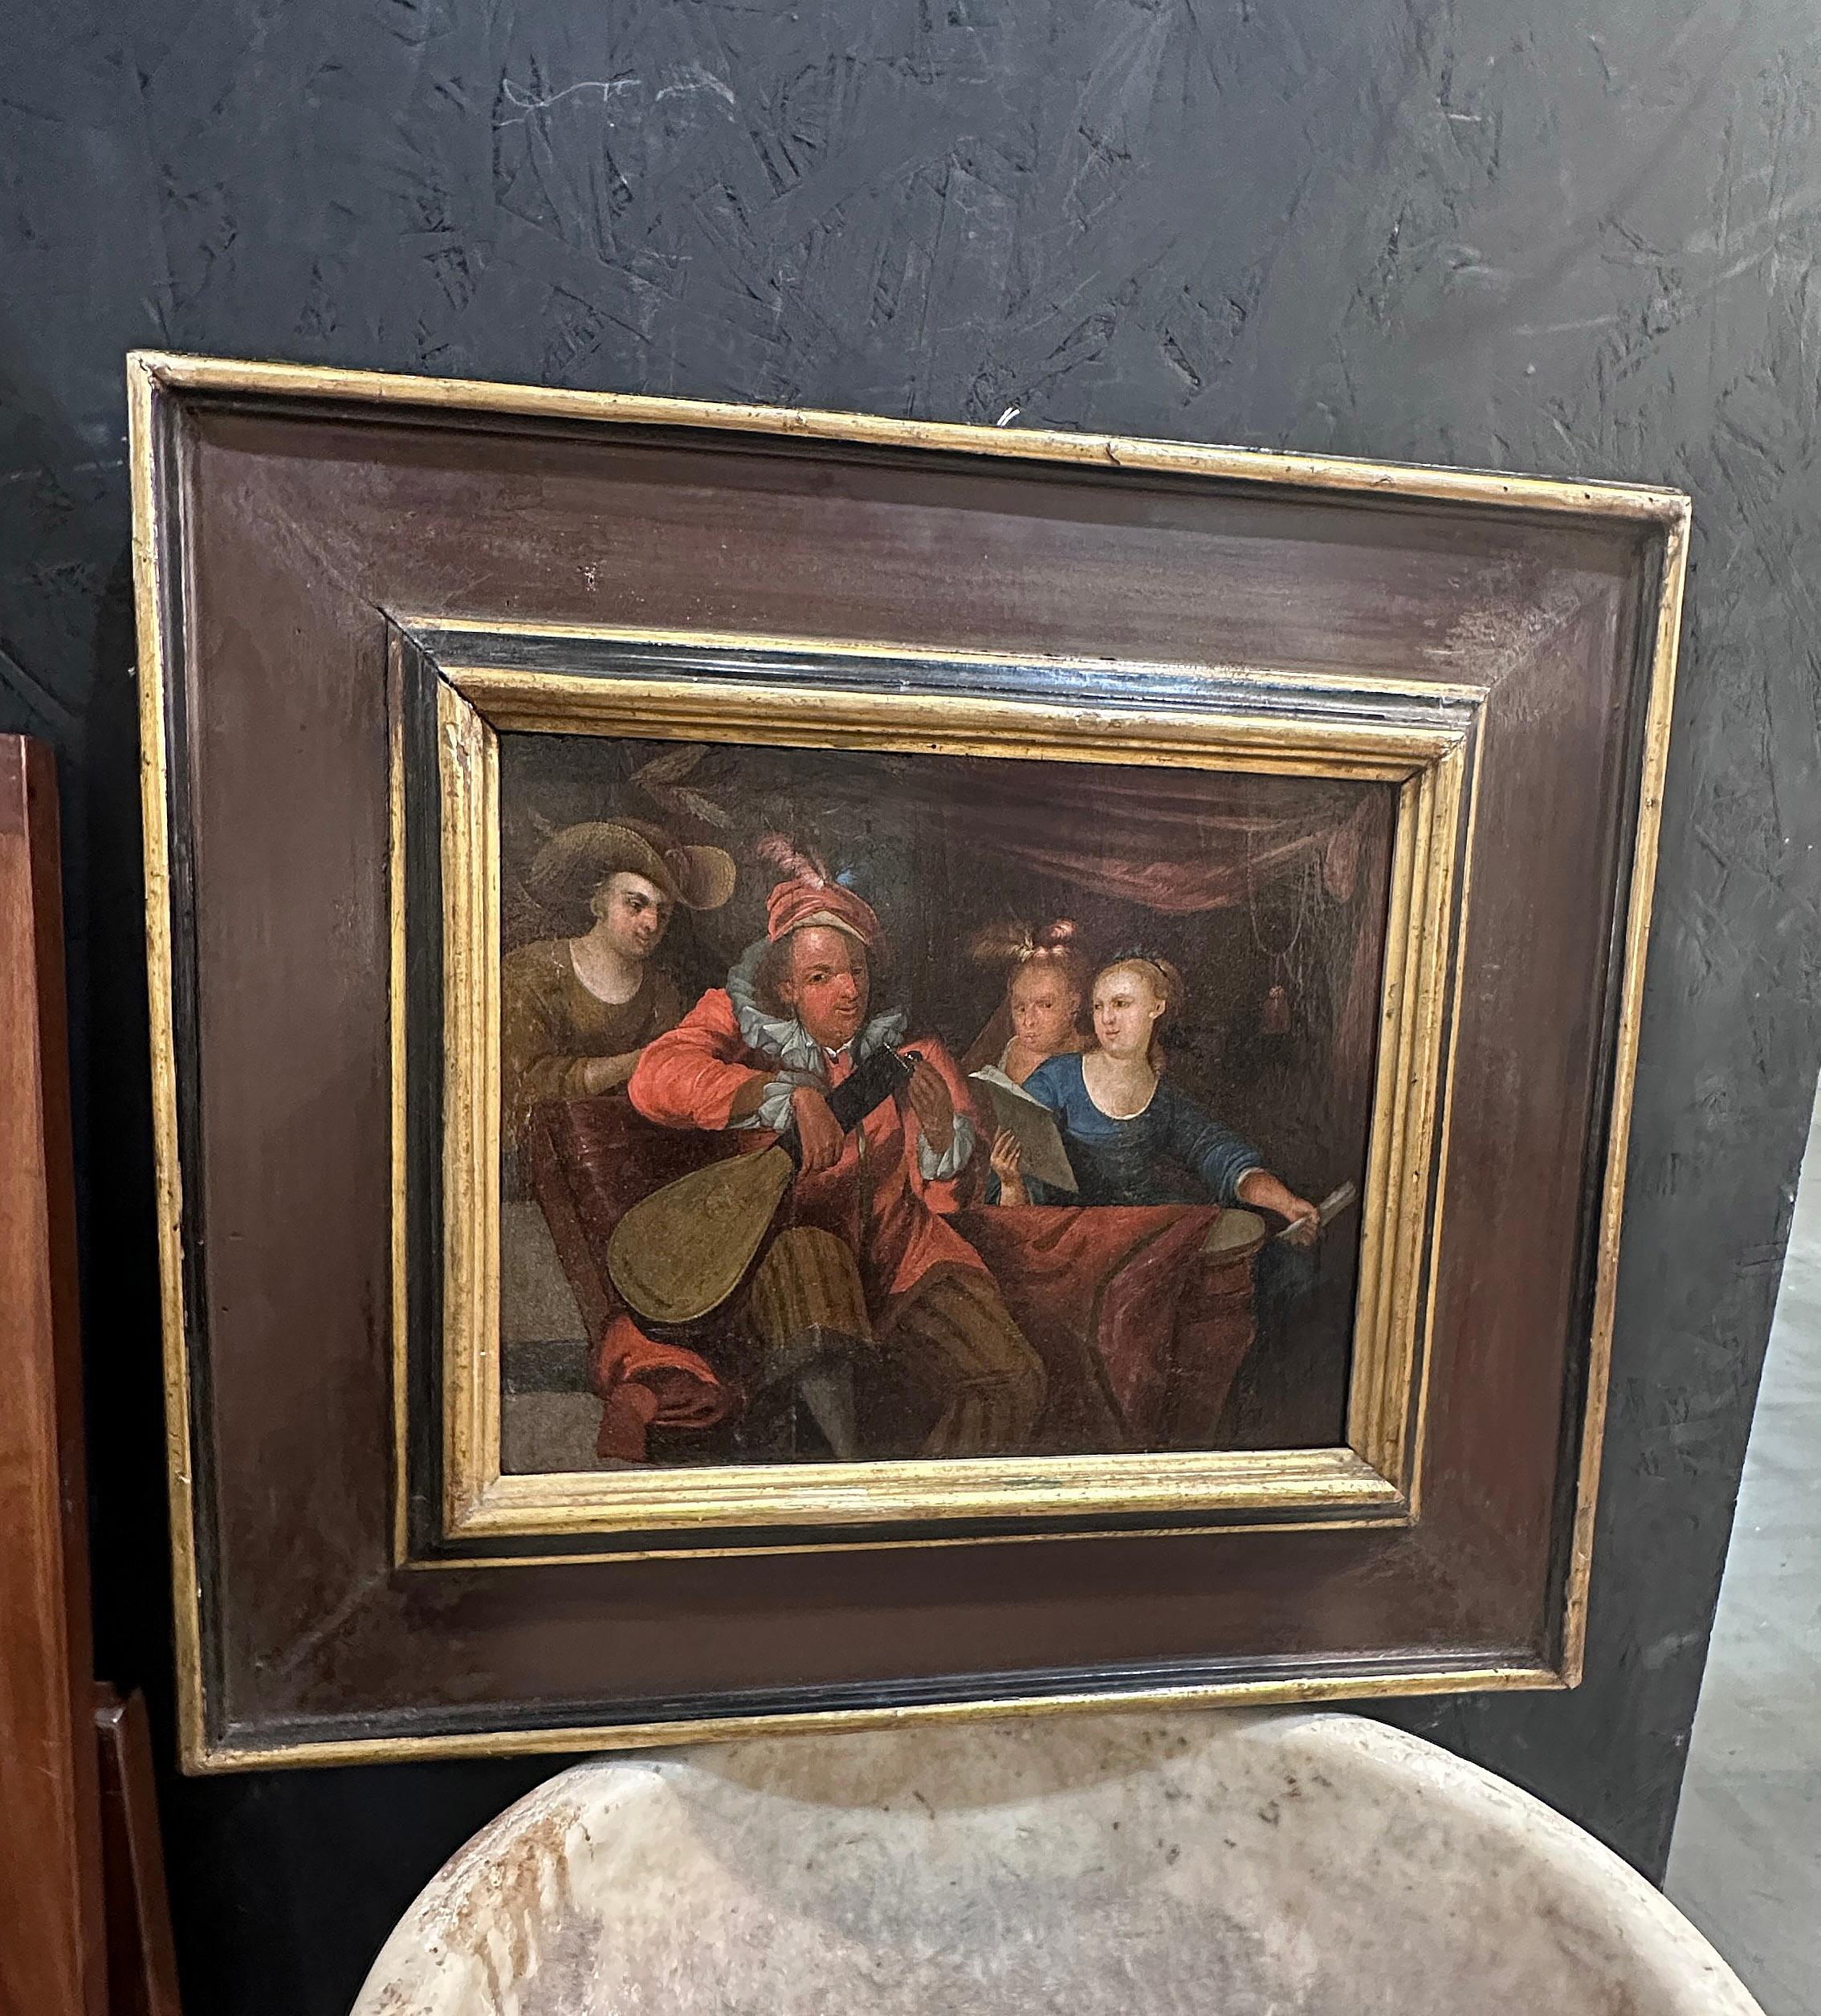 Italian 17th CENTURY PAINTING WITH PARTY AND CONCERT IN A PALACE For Sale